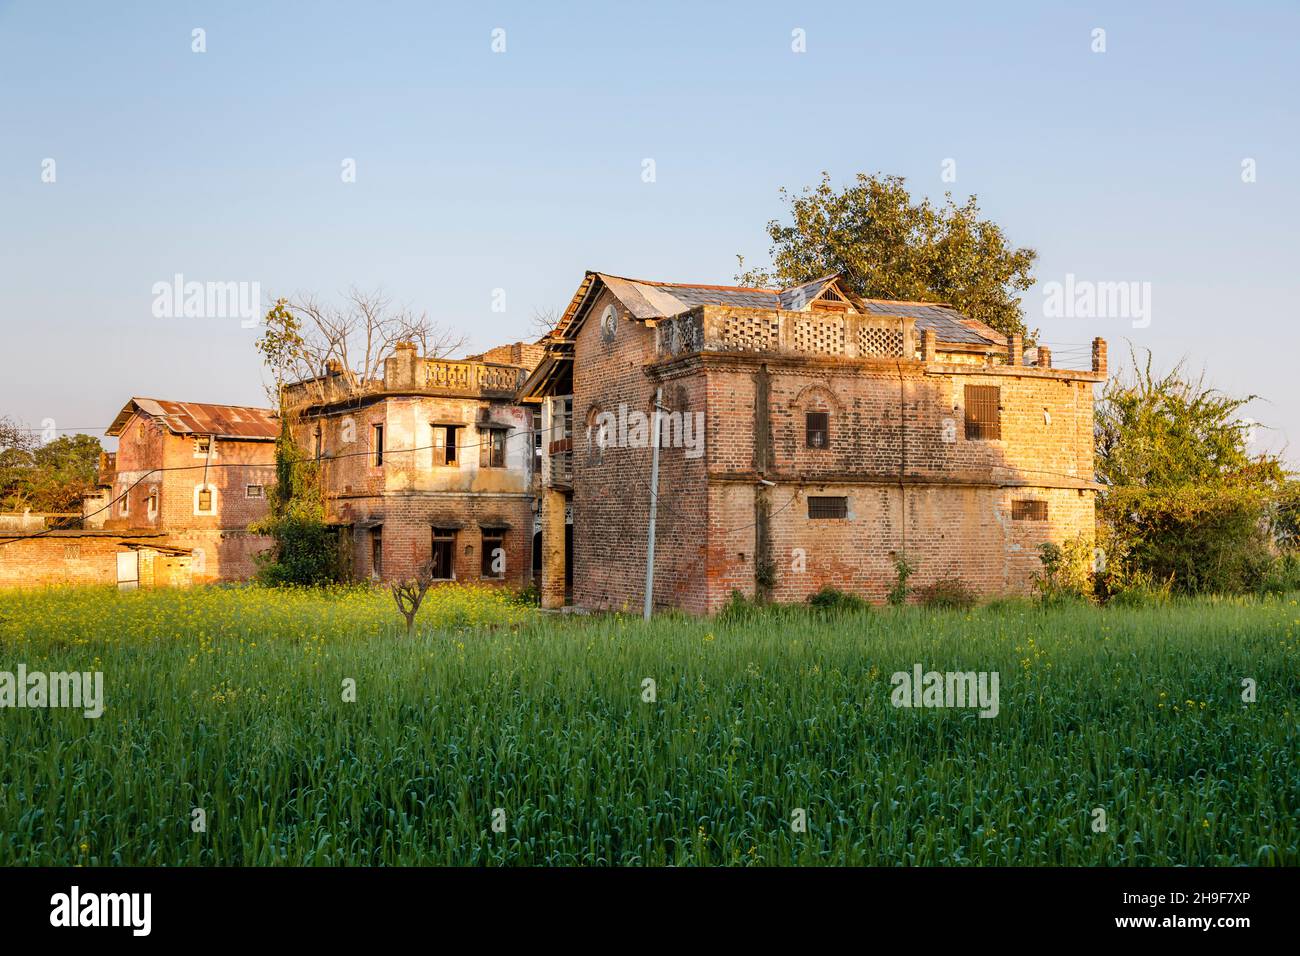 A large dilapidated empty country house in Pragpur, a heritage village in Kagra district, Himachal Pradesh, India Stock Photo